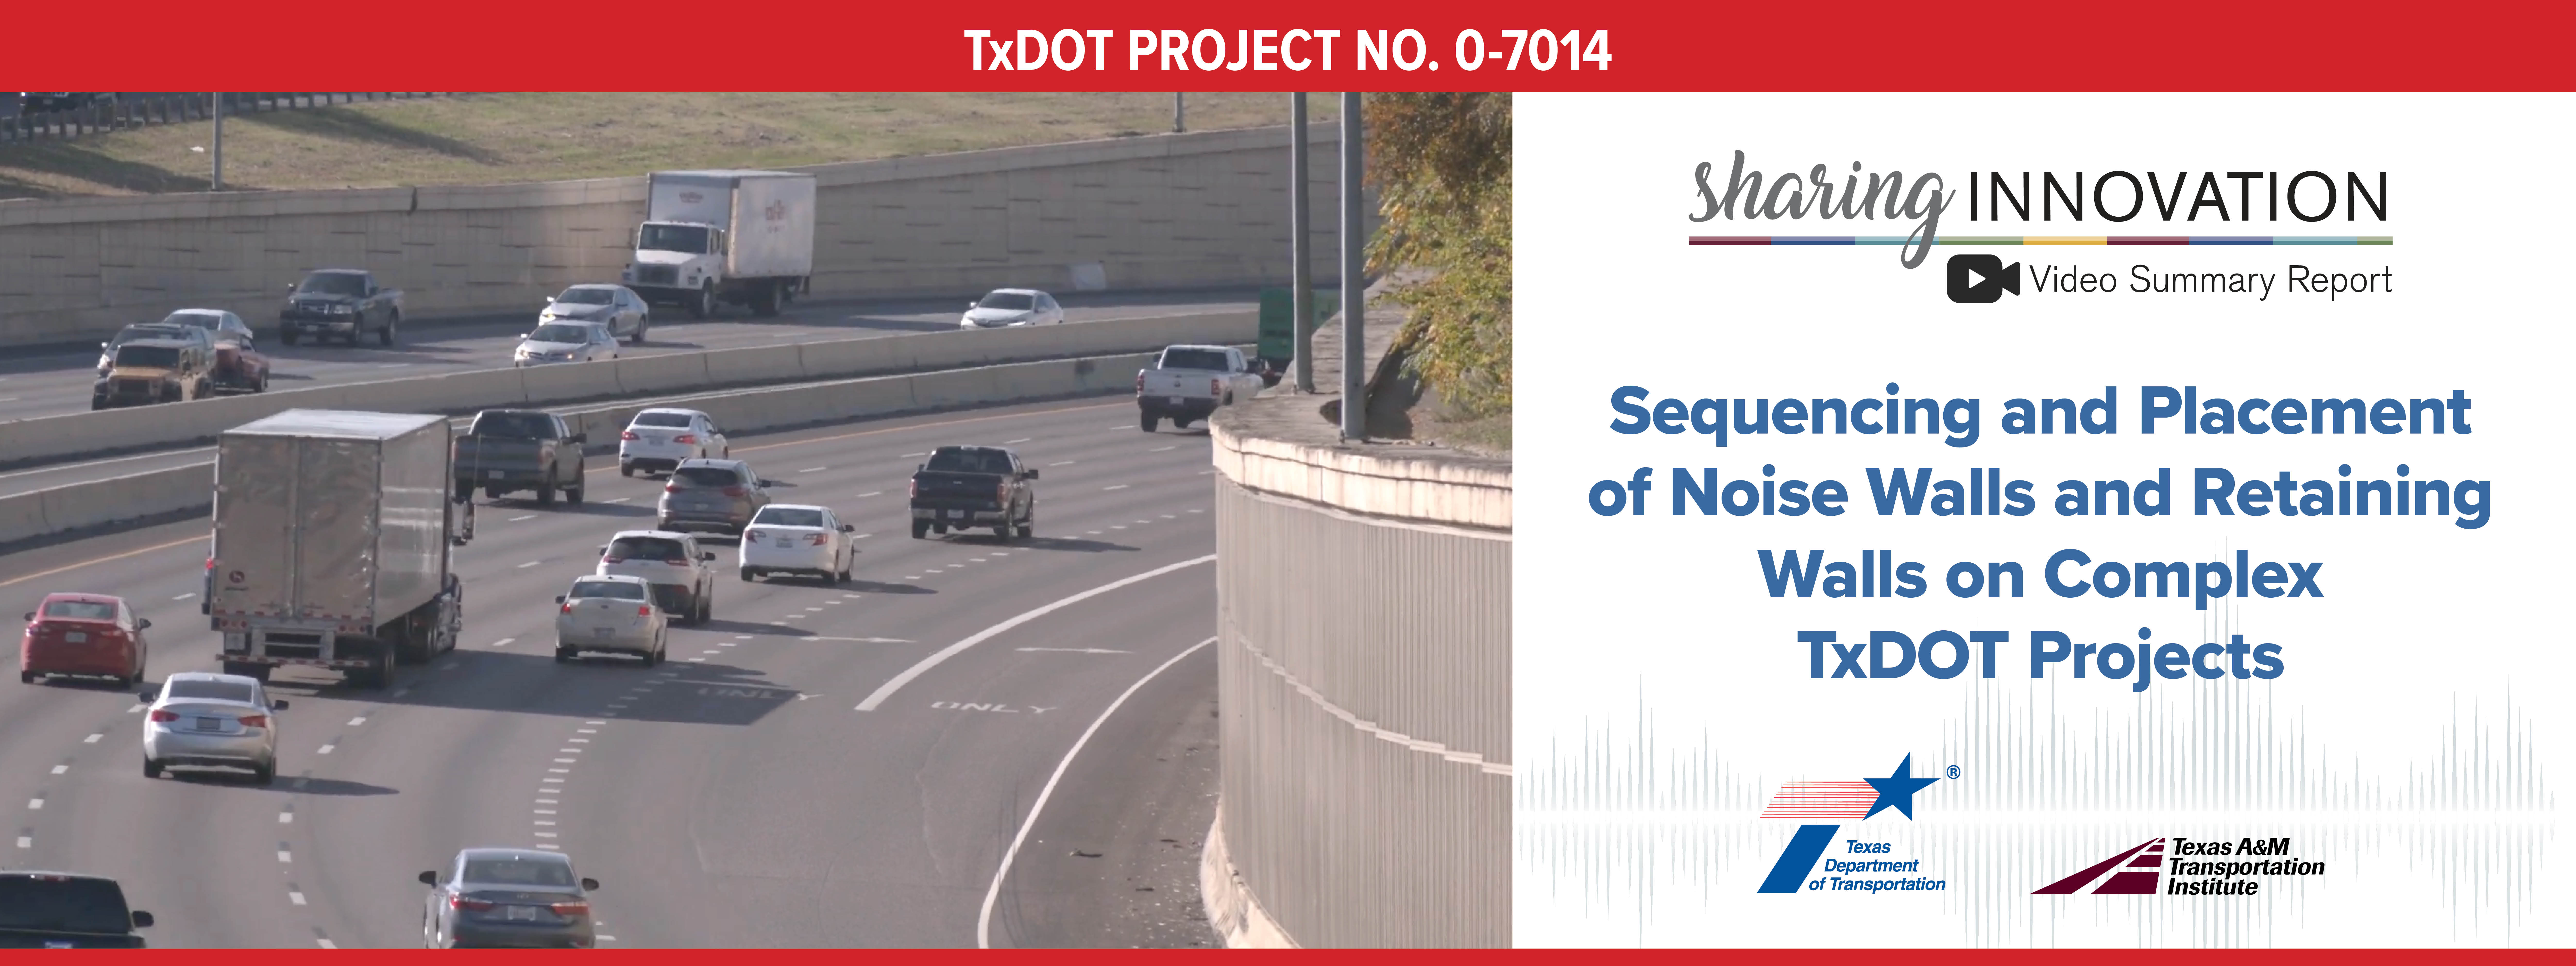 Sharing Innovation Video Summary Report: Sequencing and Placement of Noise Walls and Retaining Walls on Complex TxDOT Projects